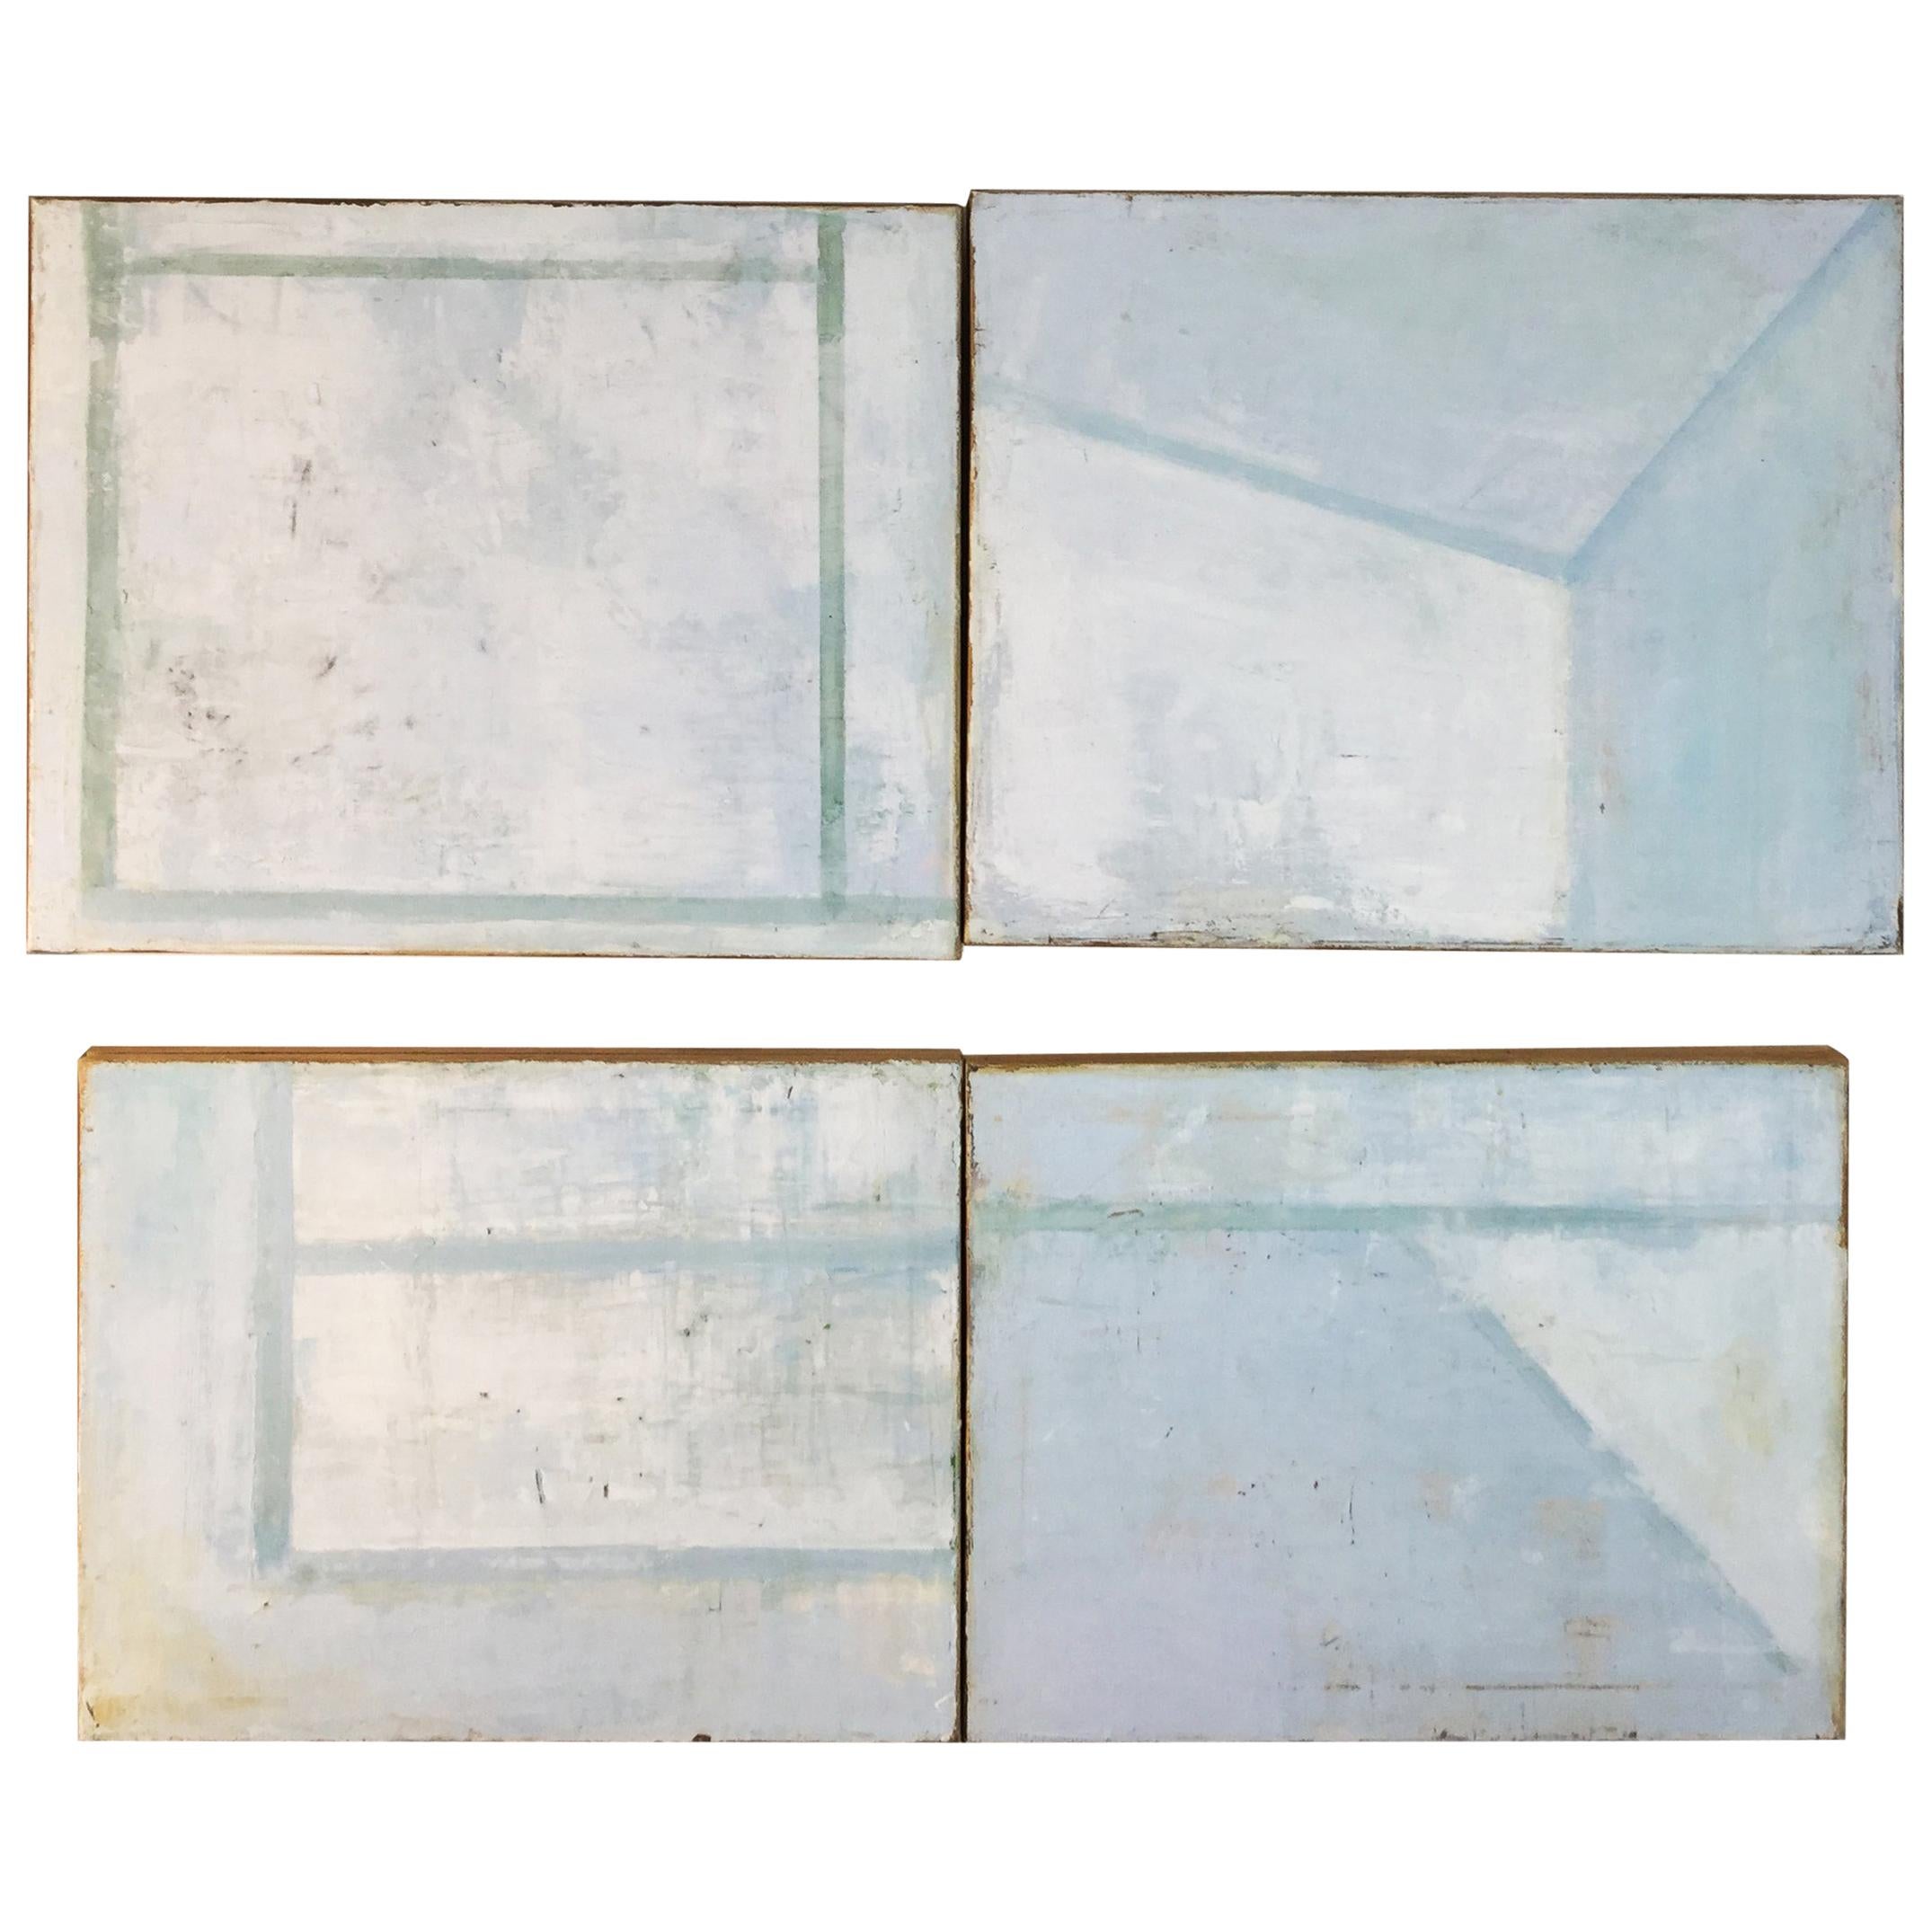 Four Layered Mixed-Media on Canvas Titled Four Corners by Robin Phillips